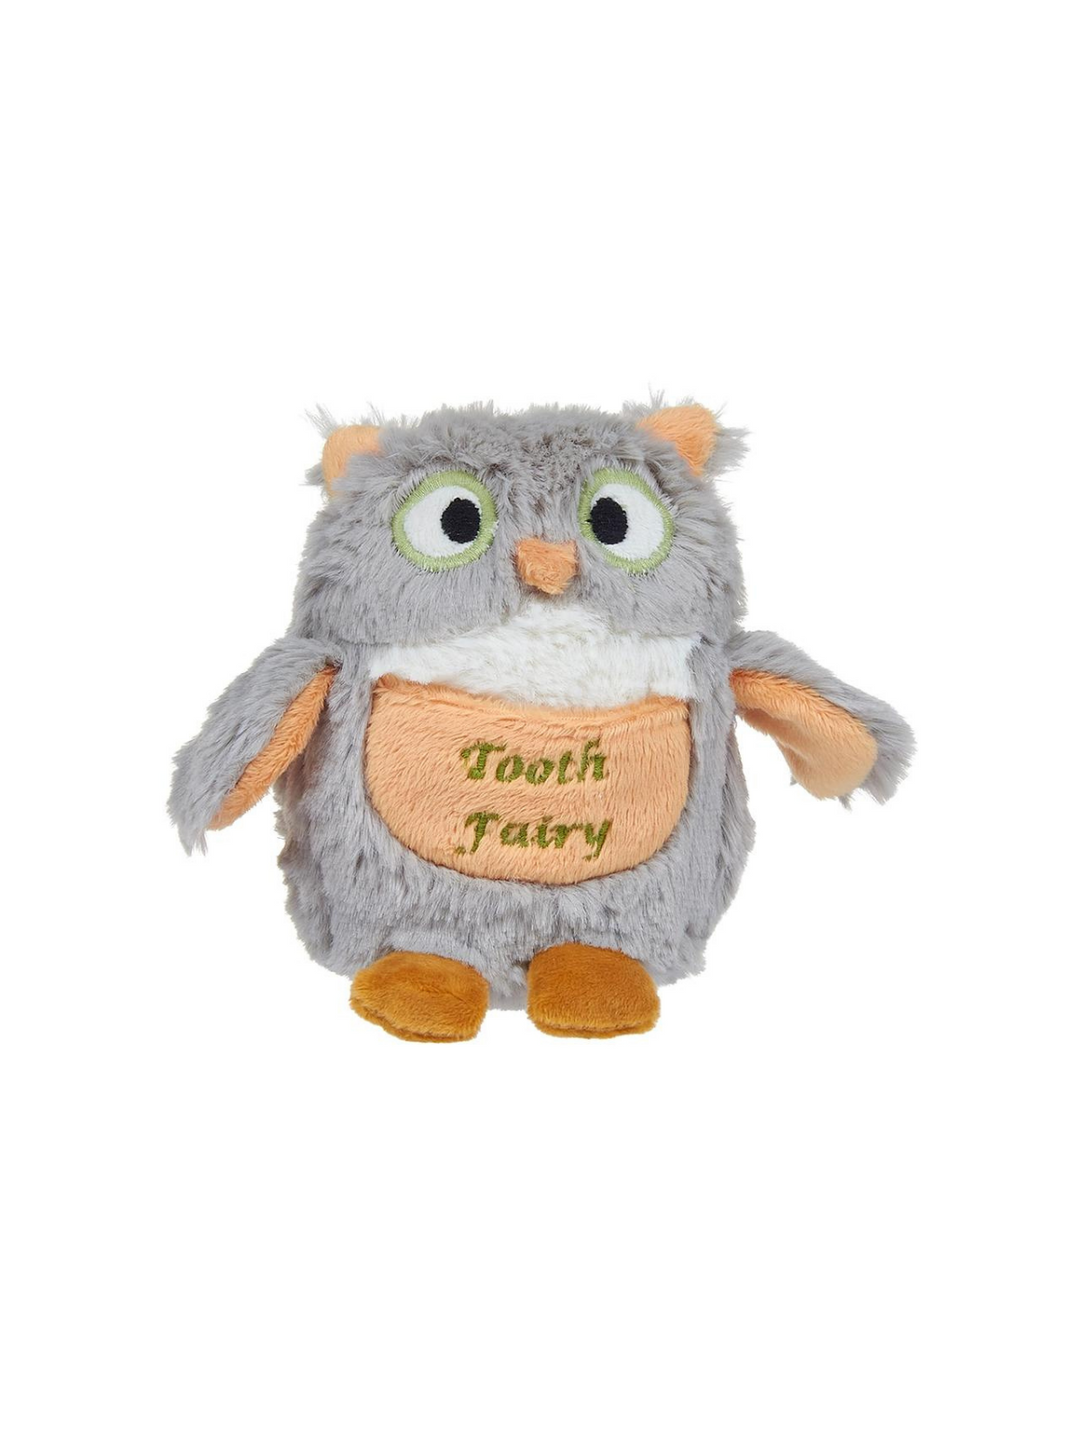 Tooth Fairy Plush - Woodsy the Owl